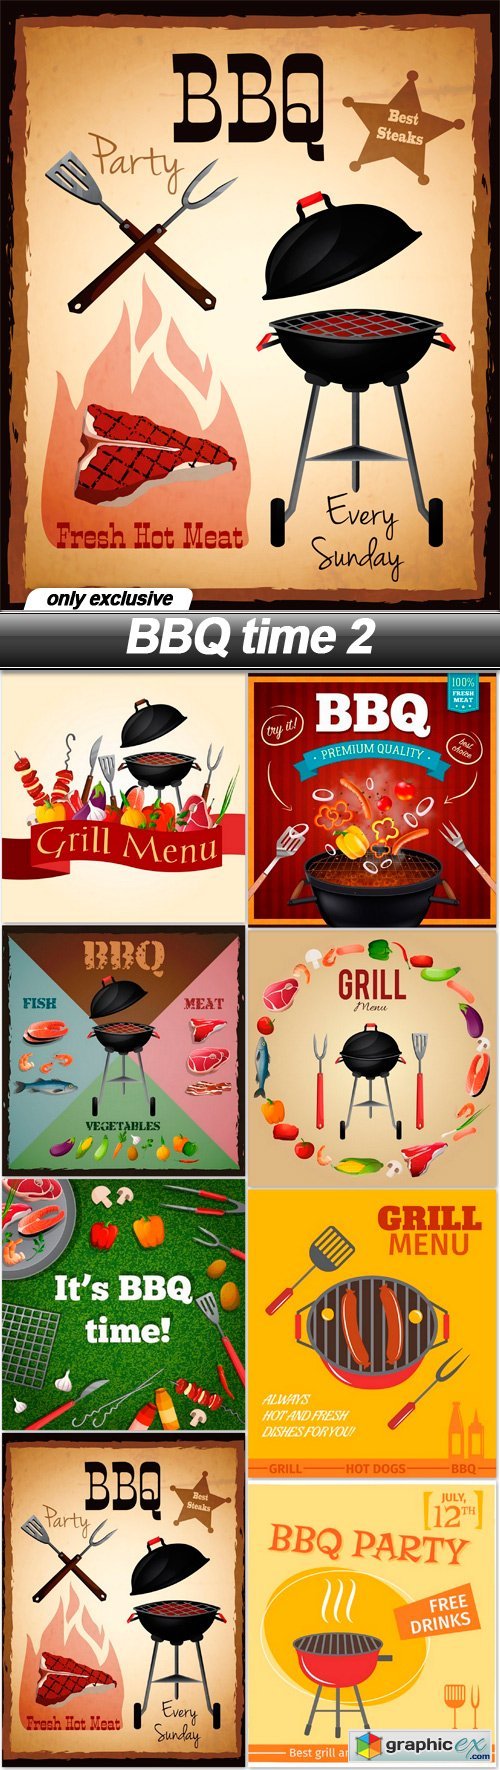 BBQ time 2 - 8 EPS